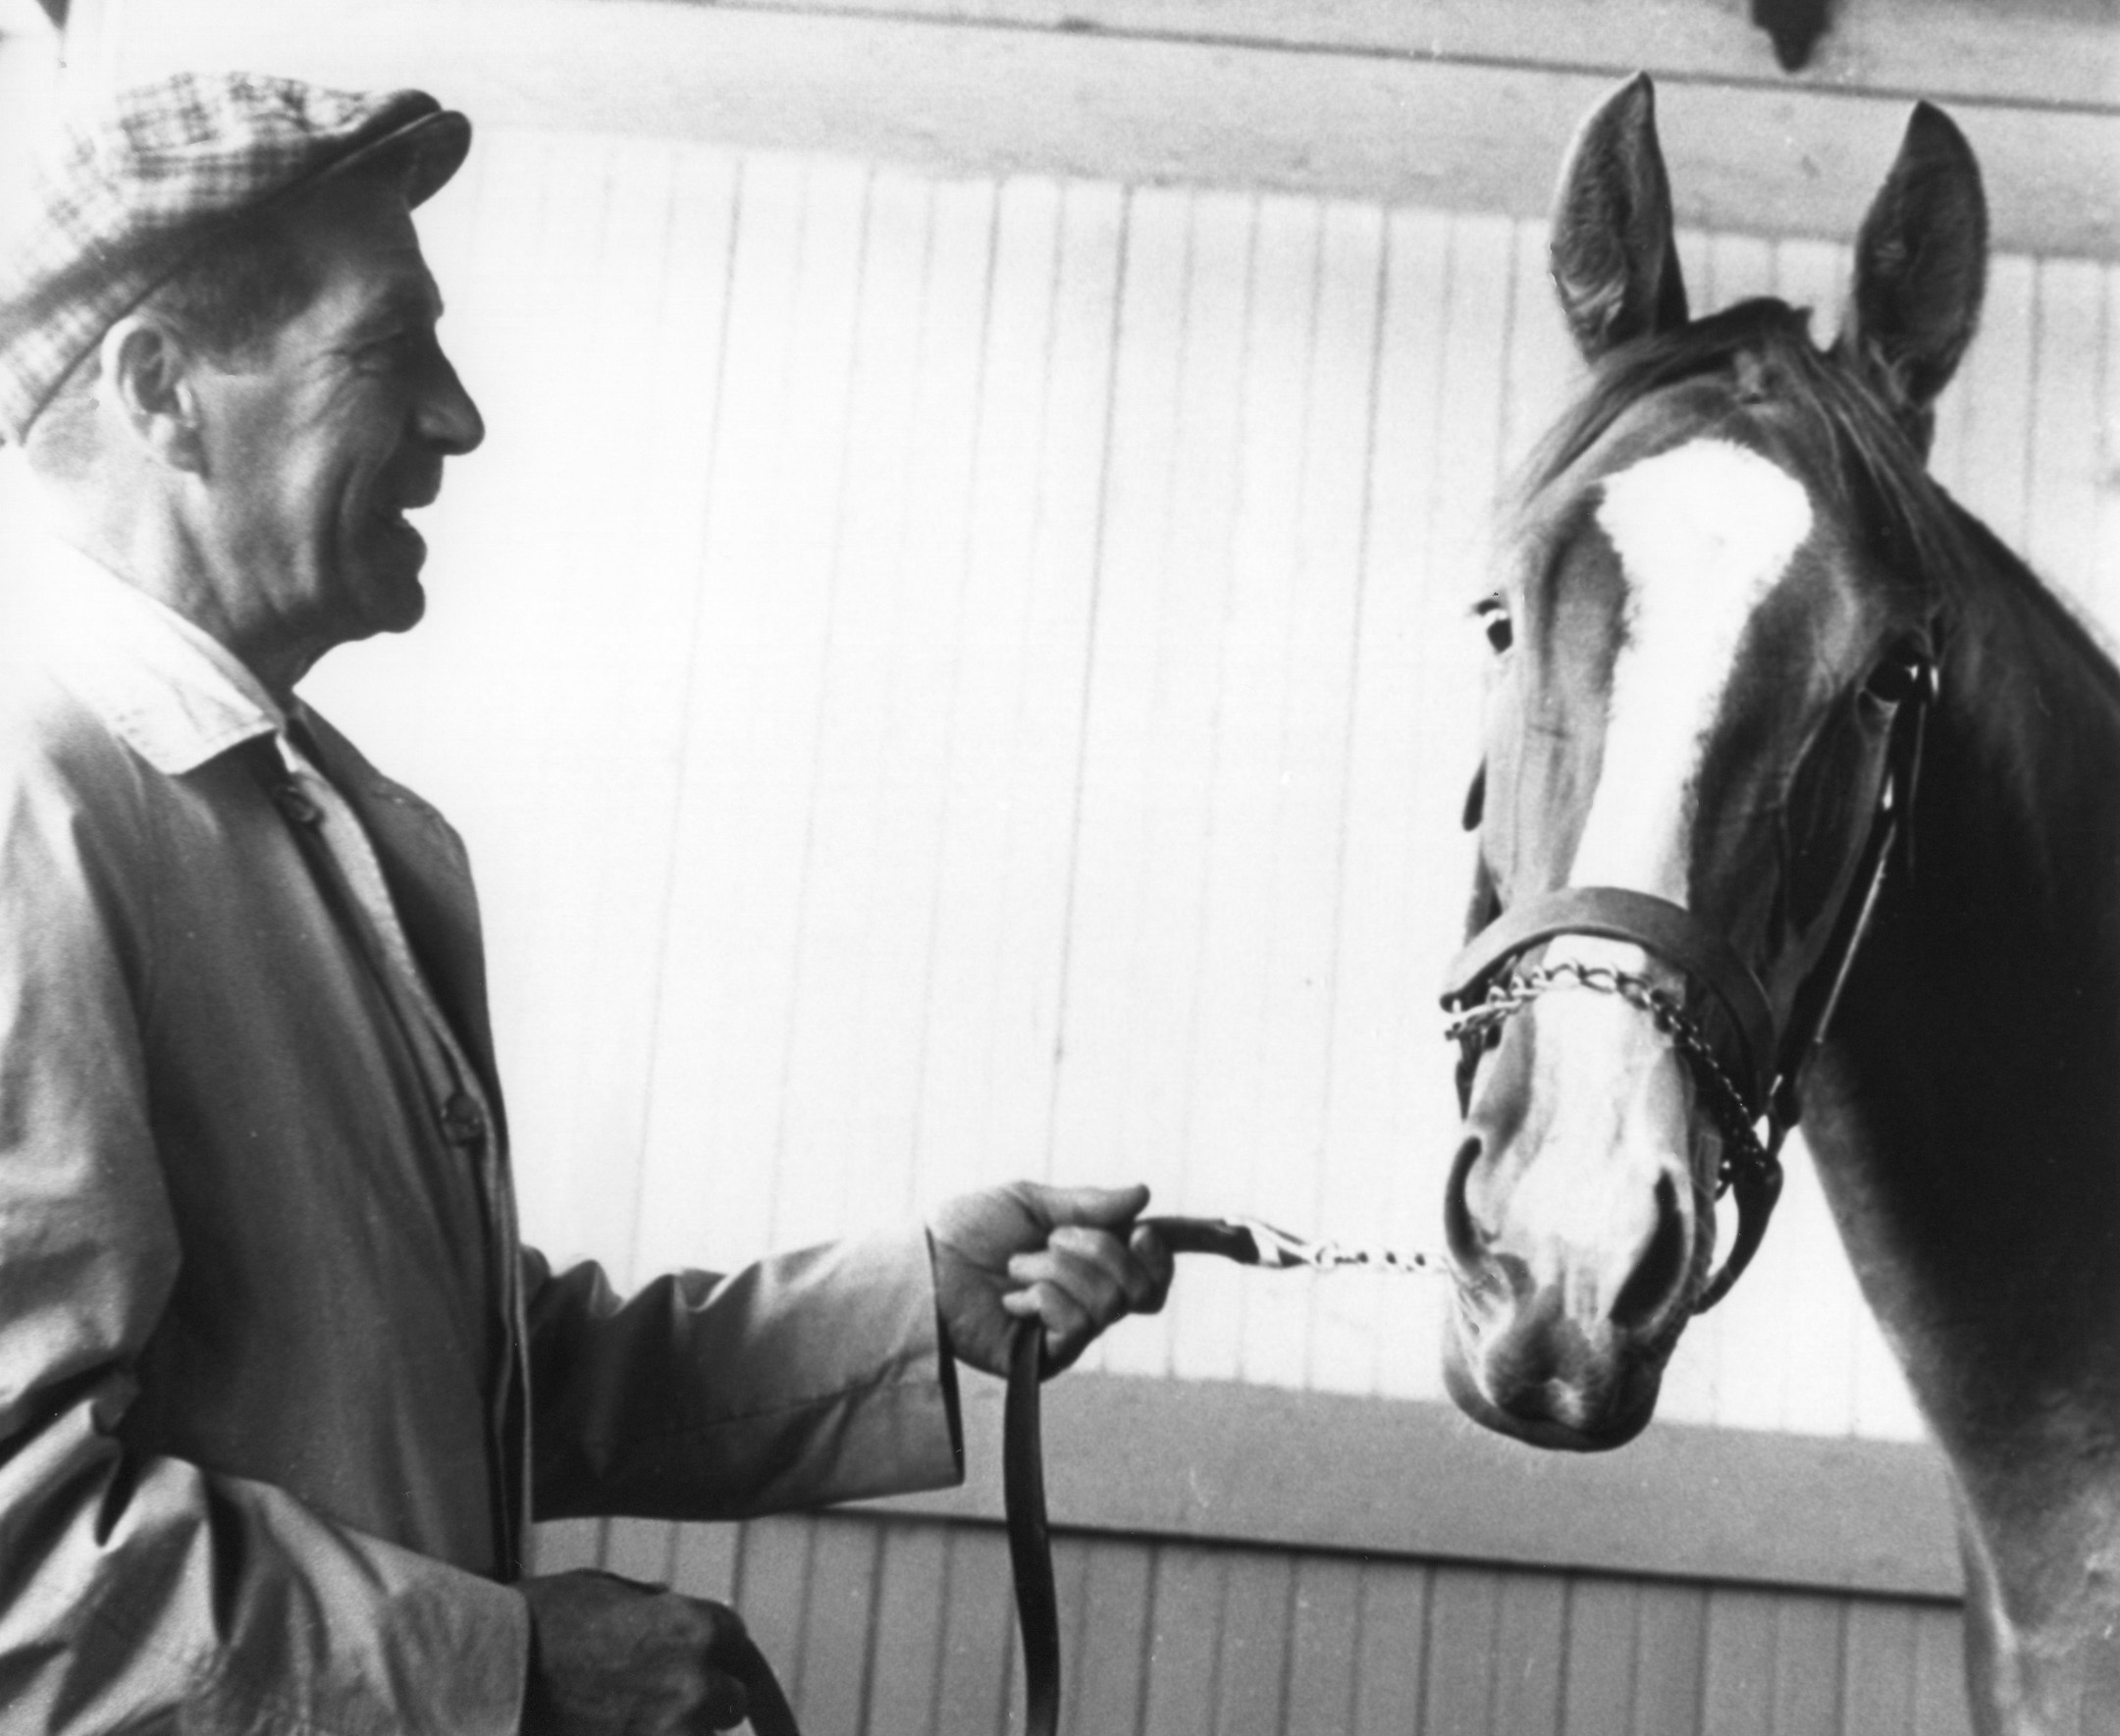 Jim Maloney with Lamb Chop in 1963 (NYRA/Museum Collection)